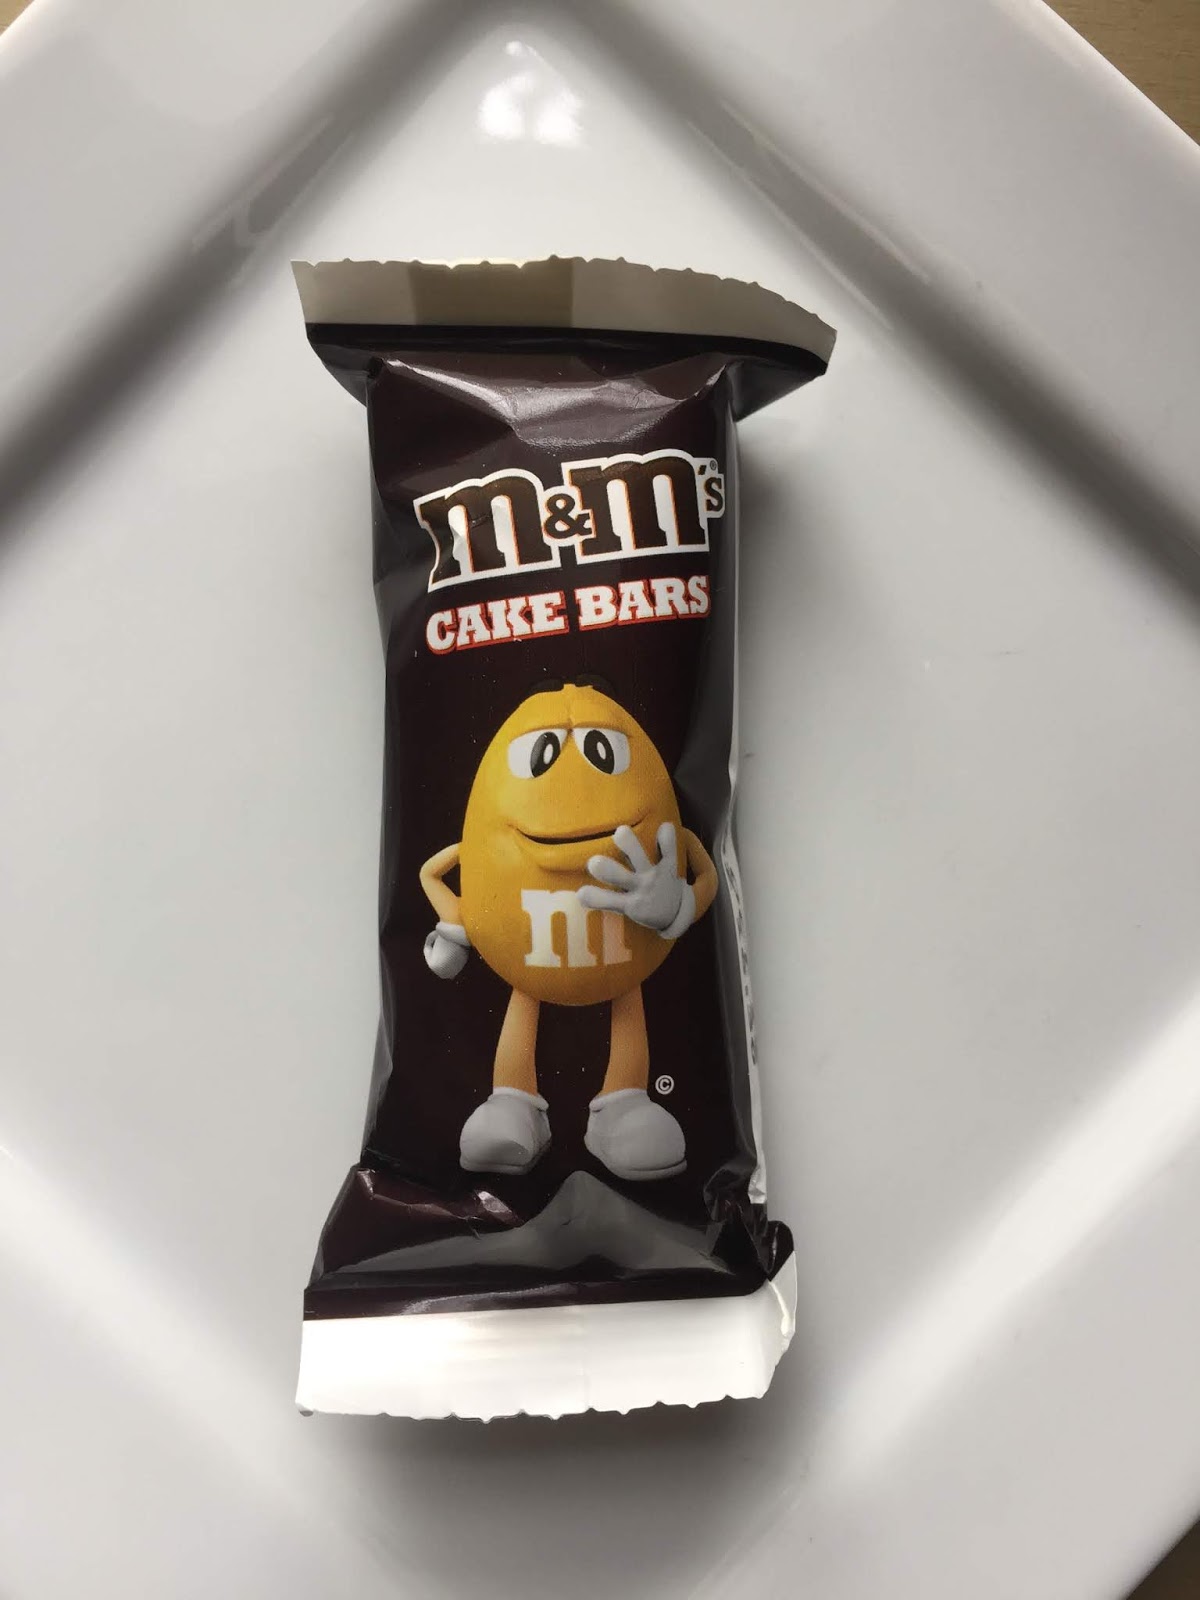 M&M's Chocolates for sale in the Philippines - Prices and Reviews